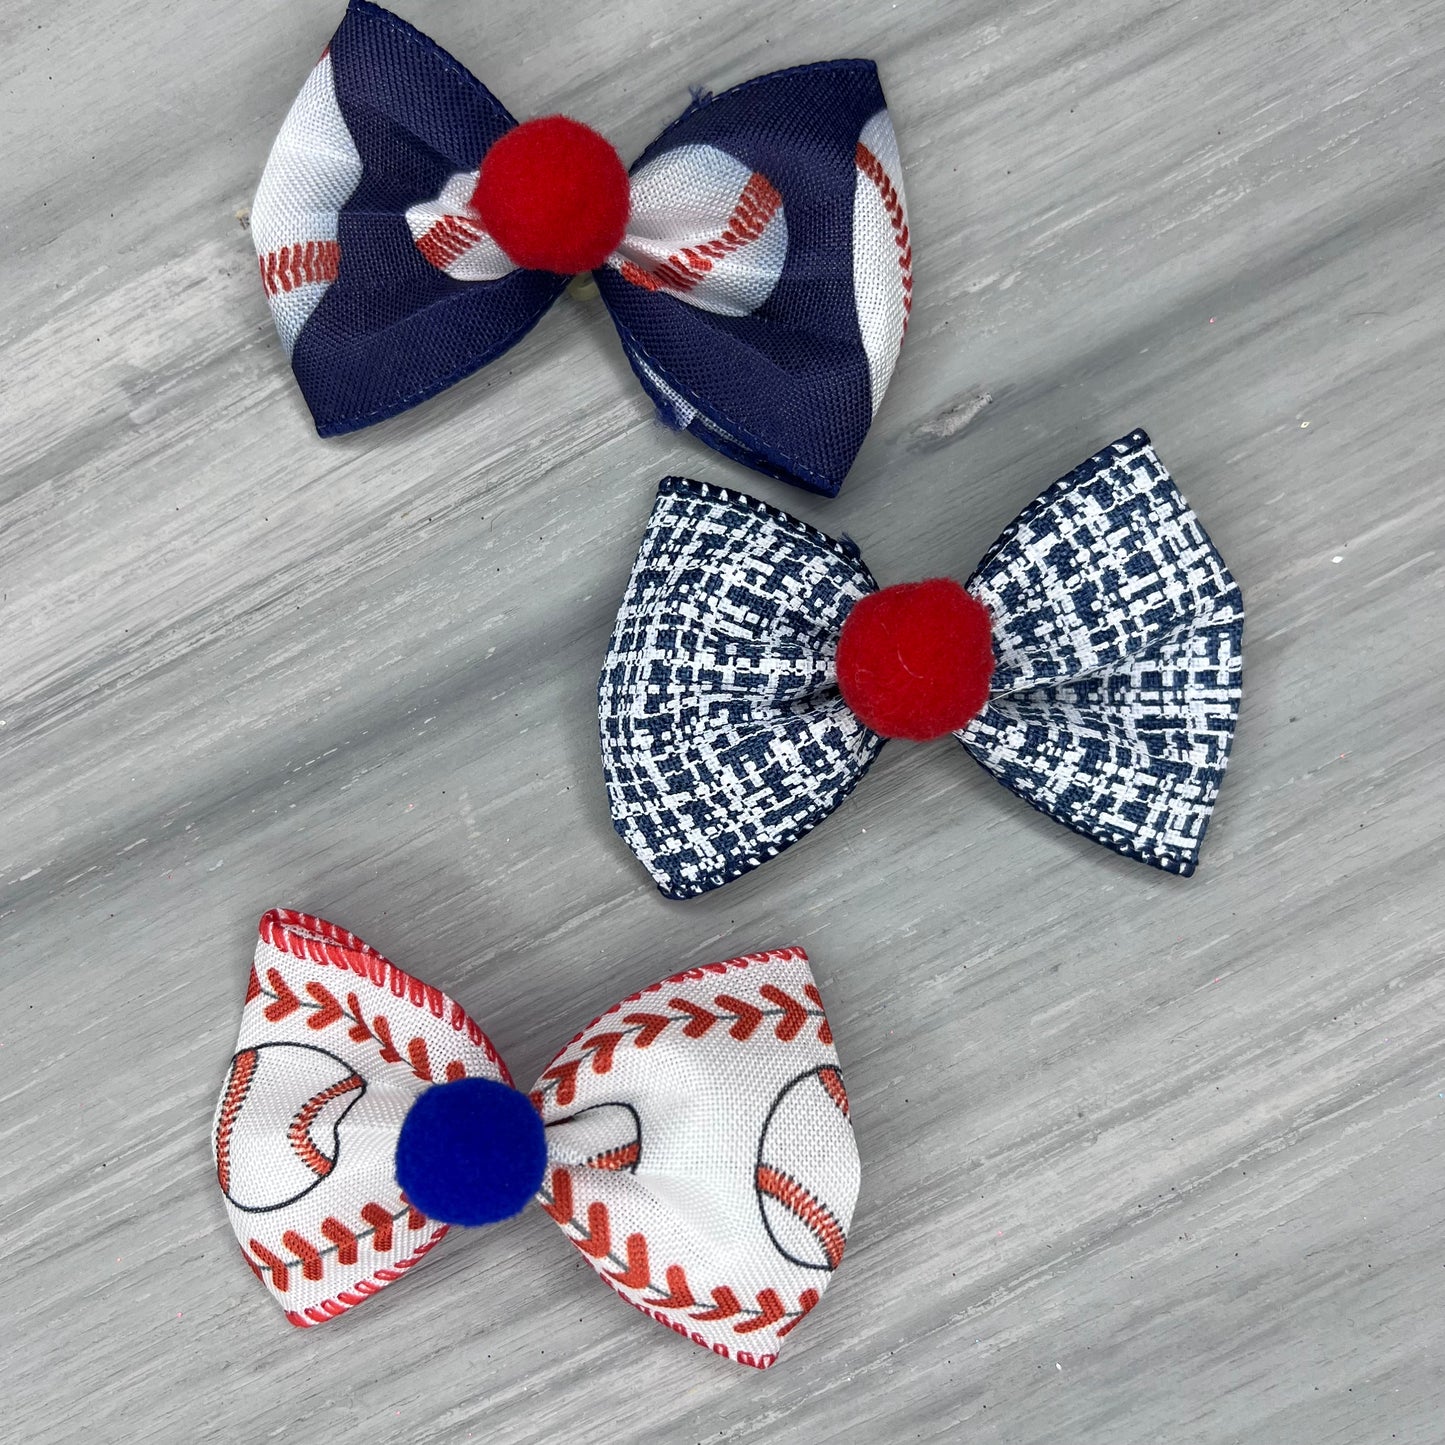 Play Ball - Over the Top - 12 Large Bows